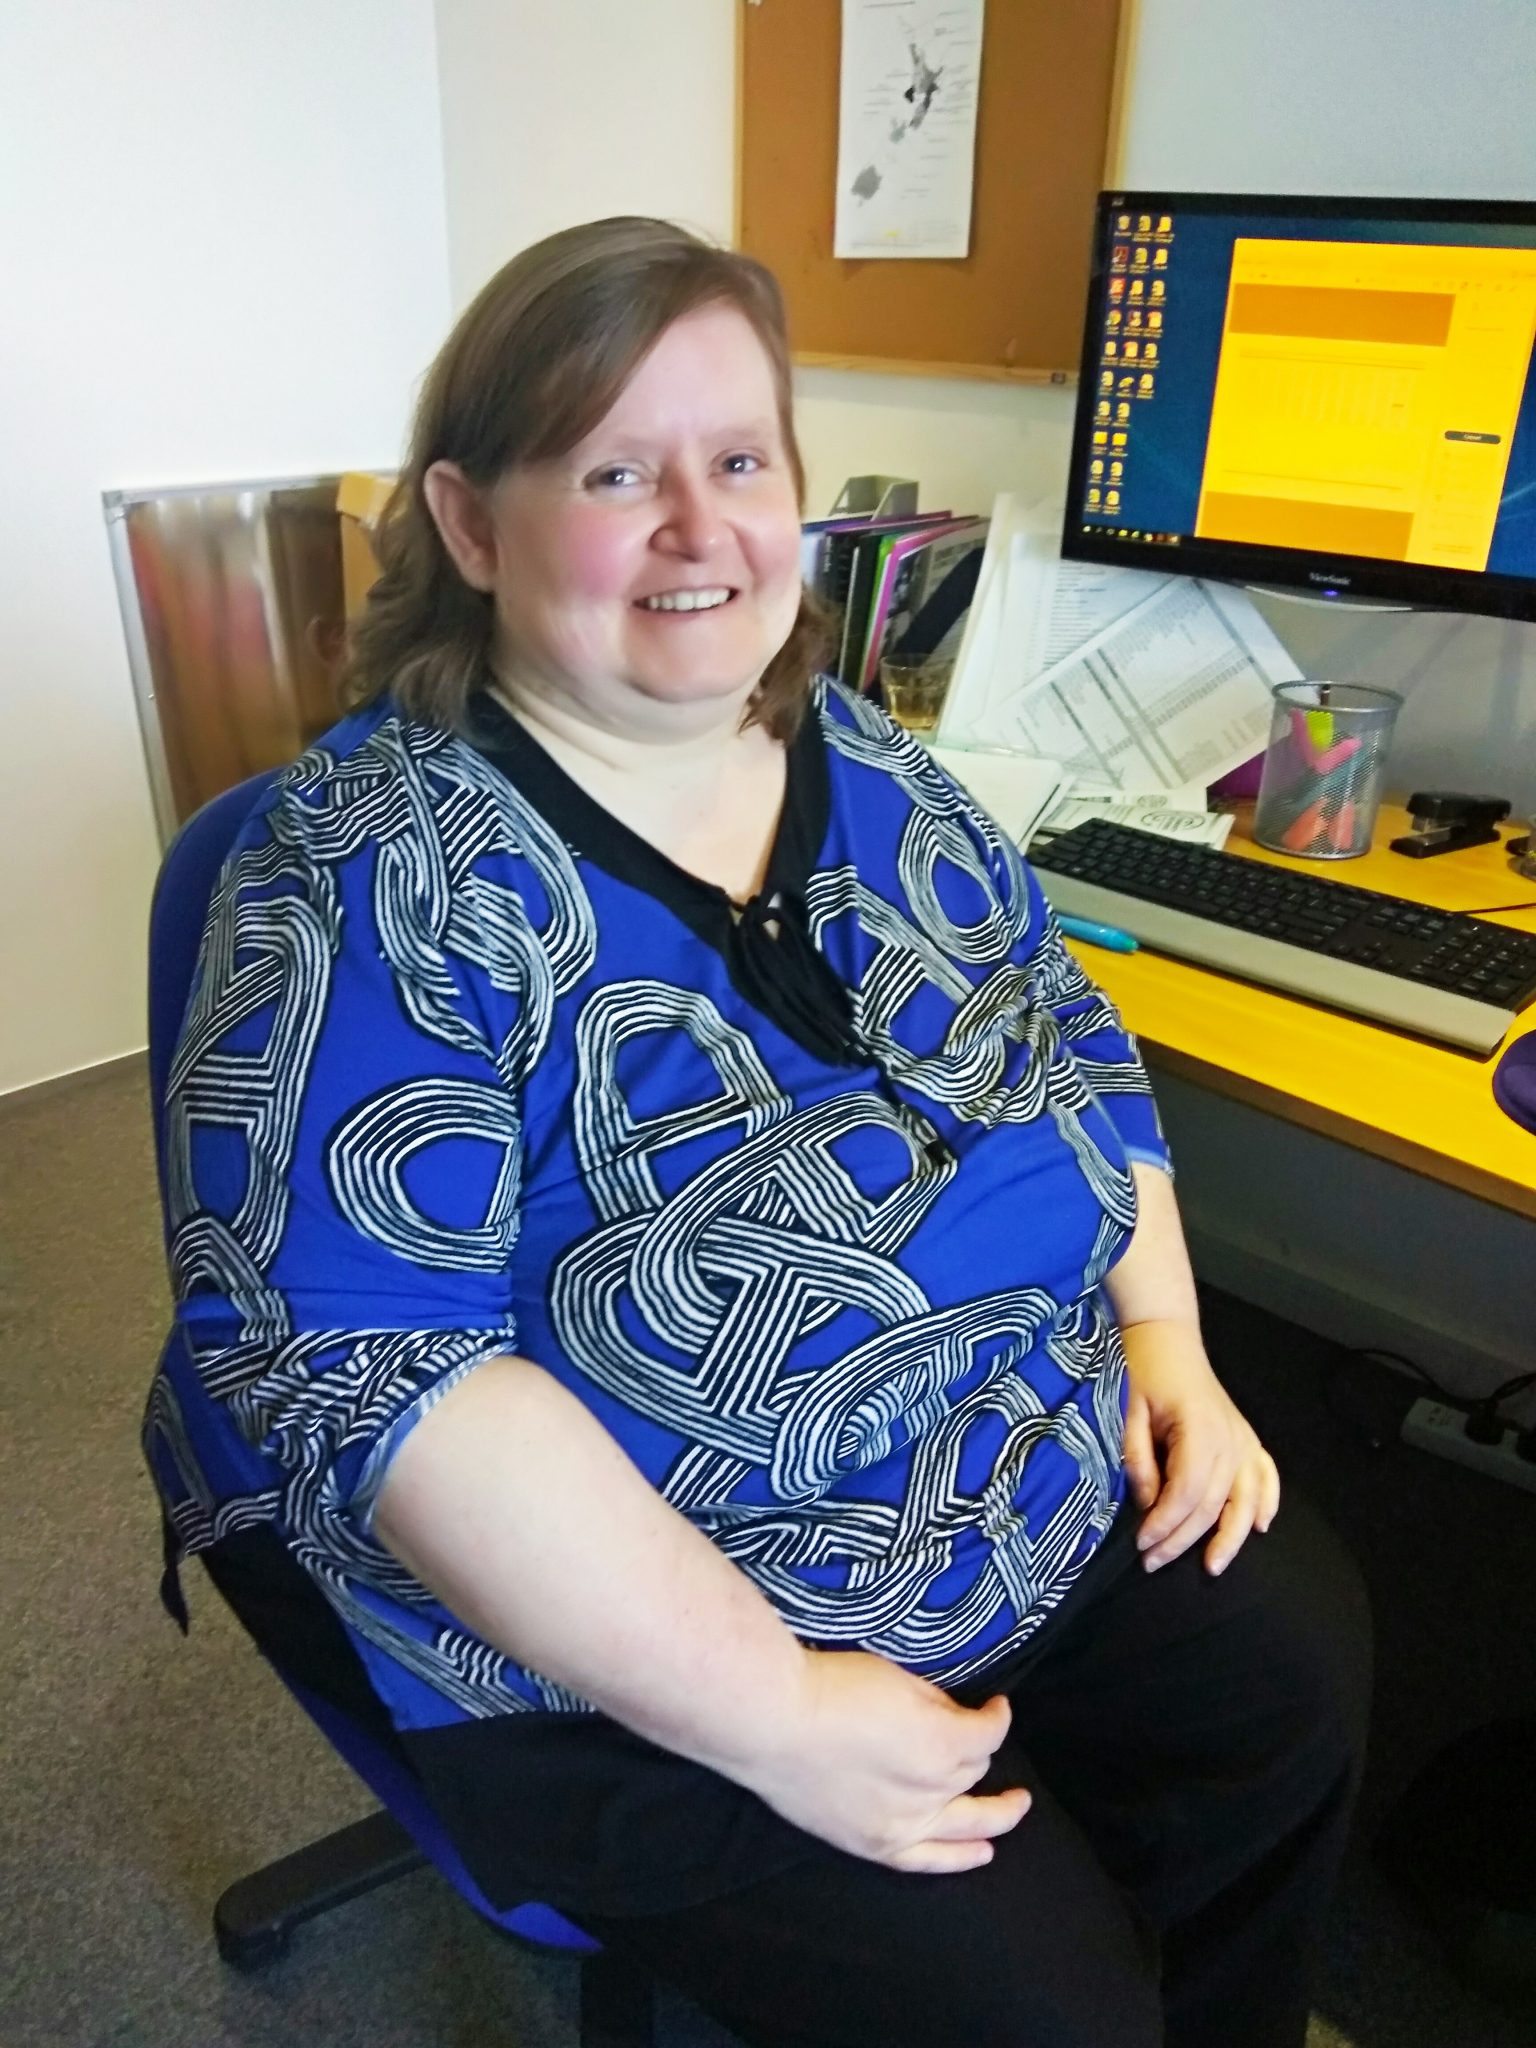 Kristina McKenzie sitting in front of a computer desk in an office.